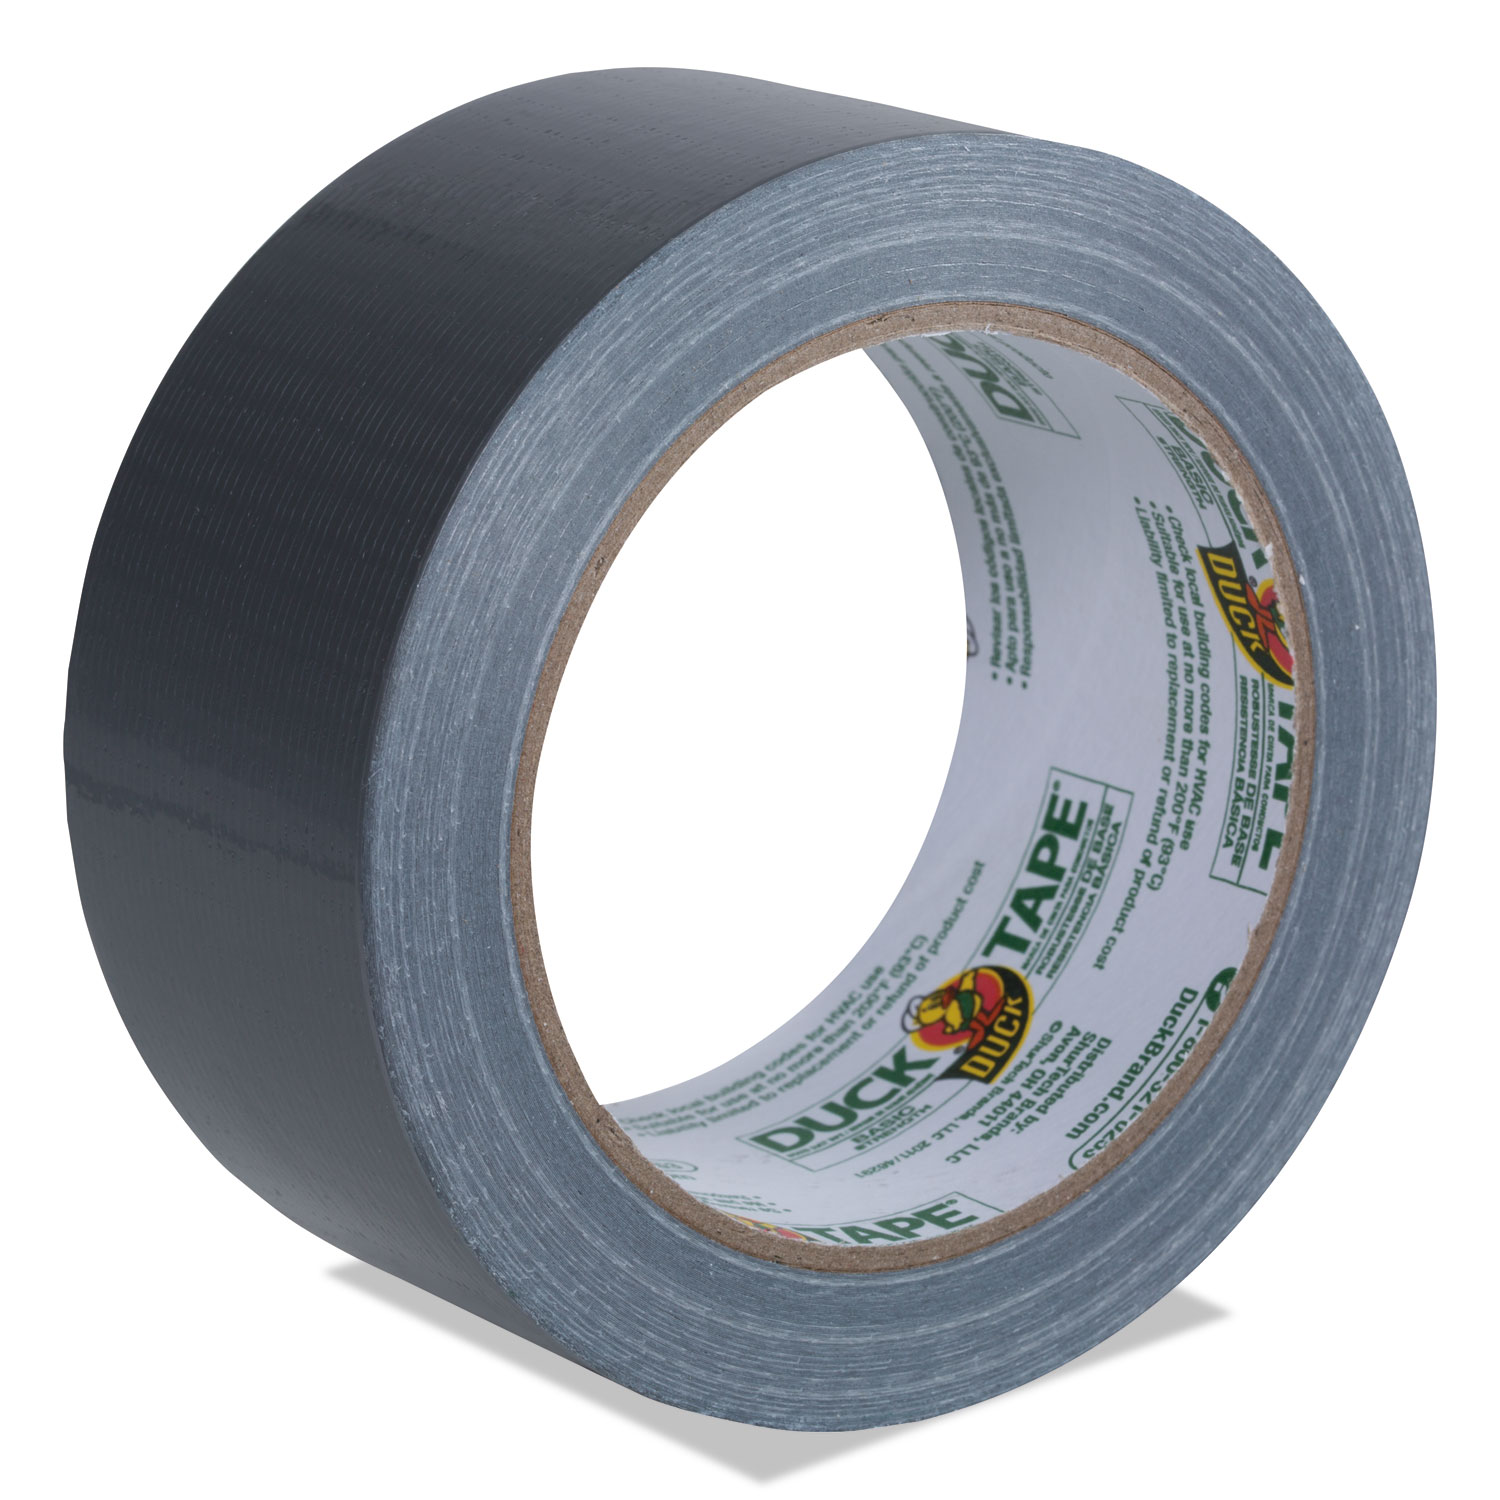 Basic Strength Duct Tape, 5.5mil, 1.88